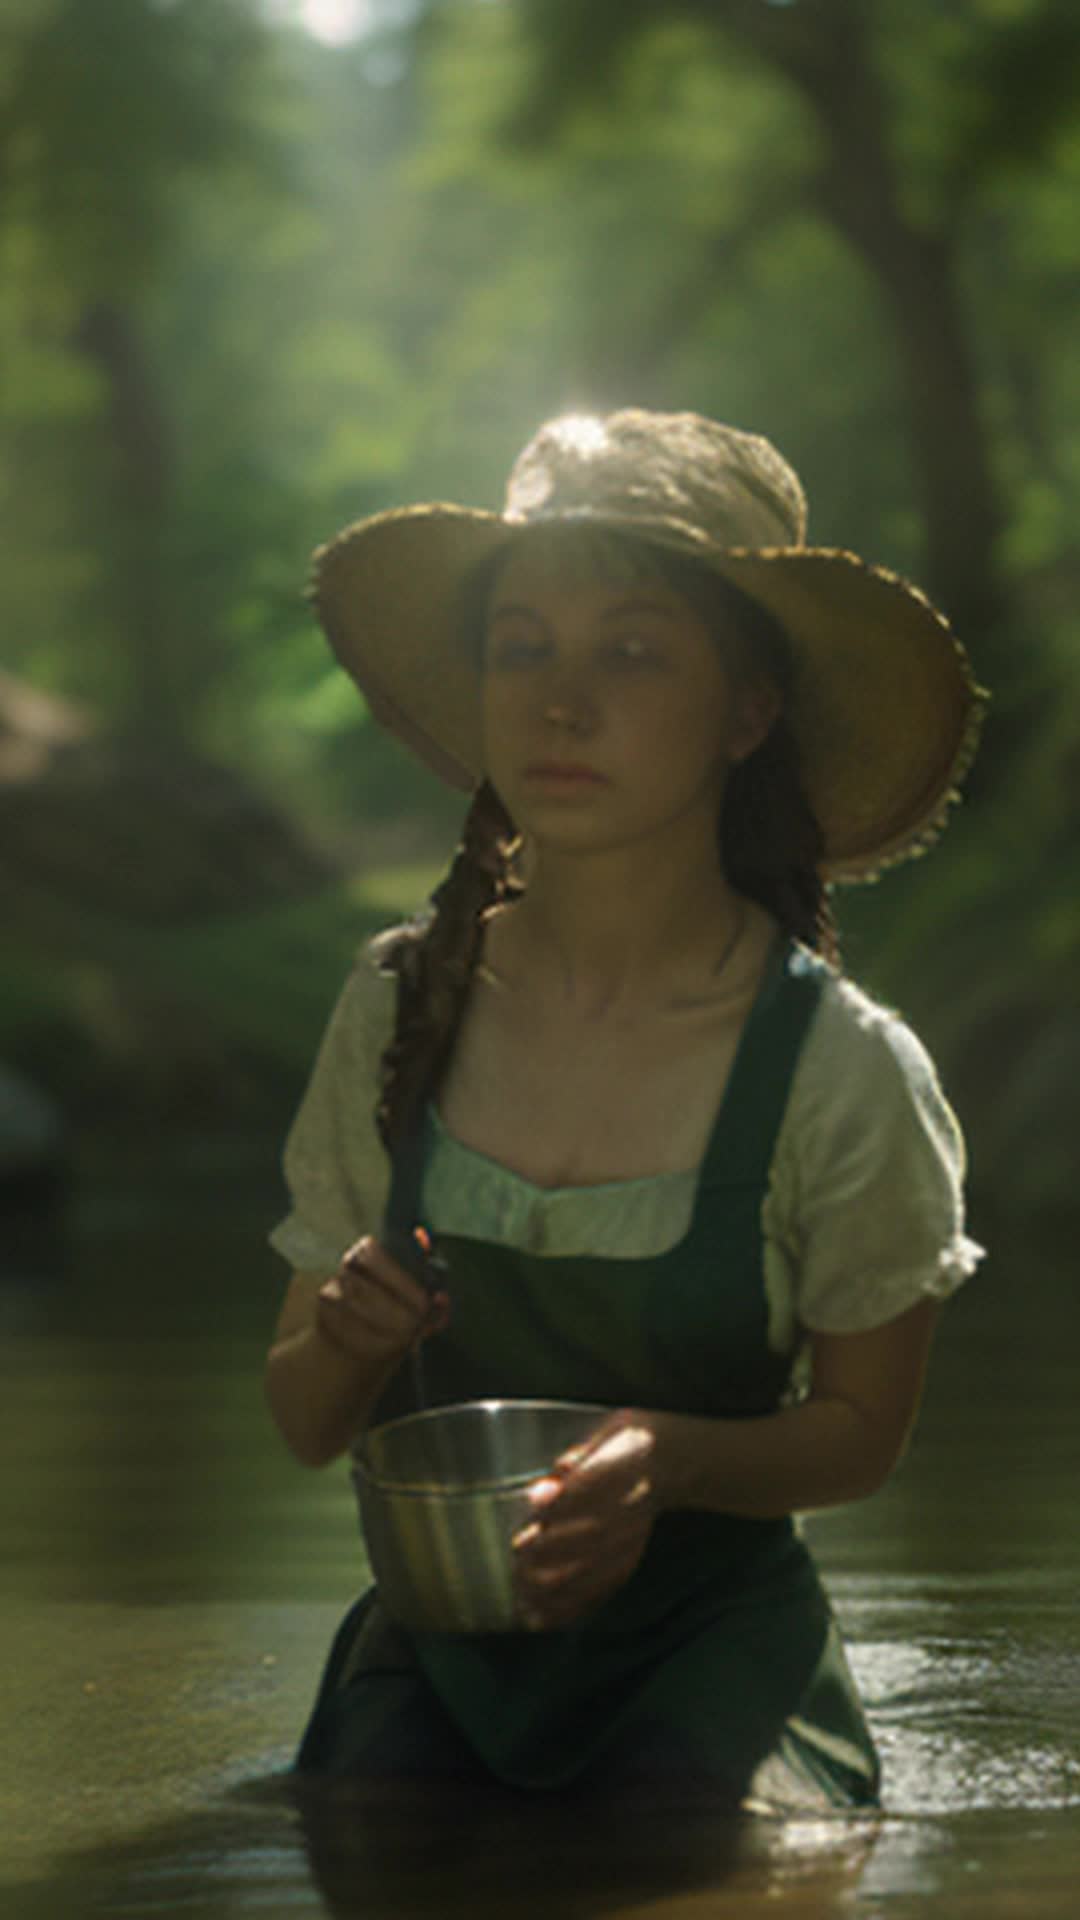 maiden fetching water from creek, 1600s attire, worn apron, rustic countryside, clear flowing creek, wooden bucket, lush green surroundings, mosscovered rocks, tall old trees, soft shadows, detailed and sharp focus, sun beams breaking through canopy, peaceful and historical ambiance, slow graceful movements, low angle shot, soft warm lighting, natural tones, serene environment, rendered by octane